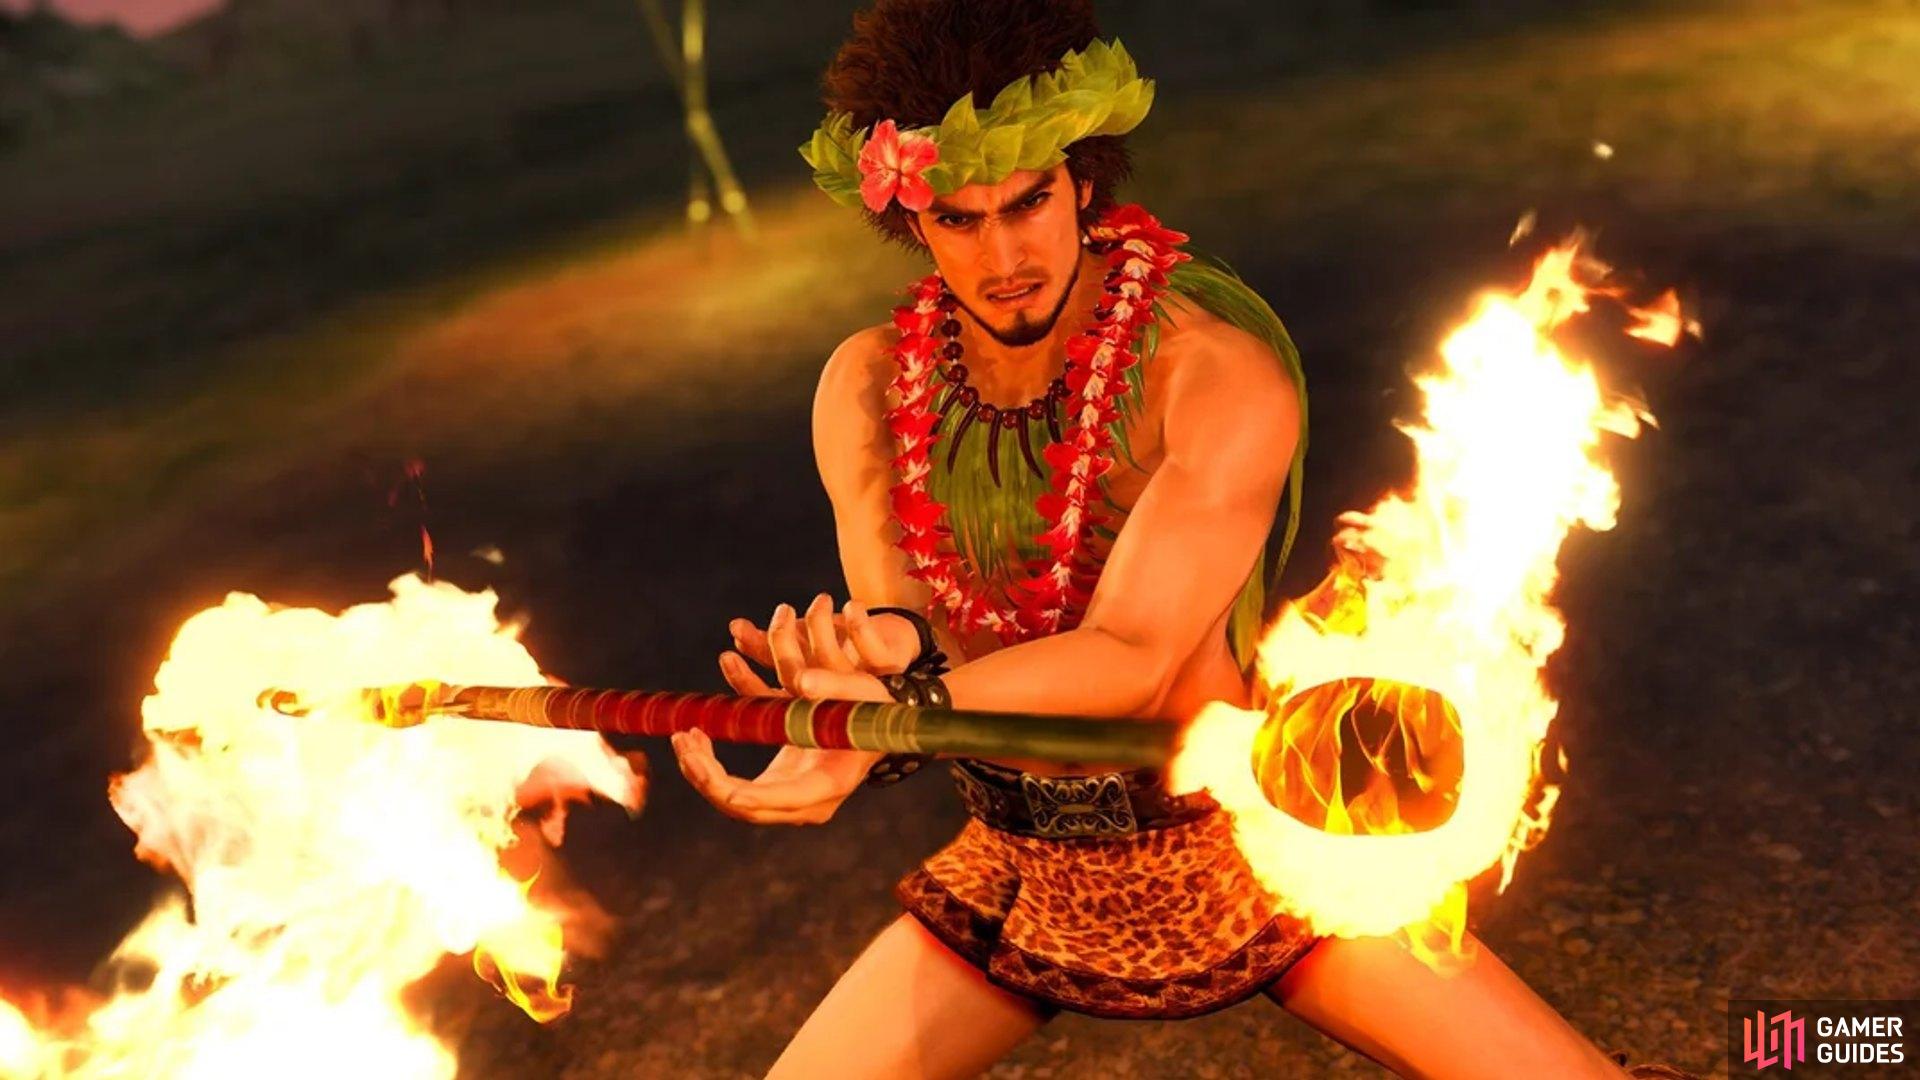 The Pyrodancer job offers some fantastic fire-based attacks and skills.